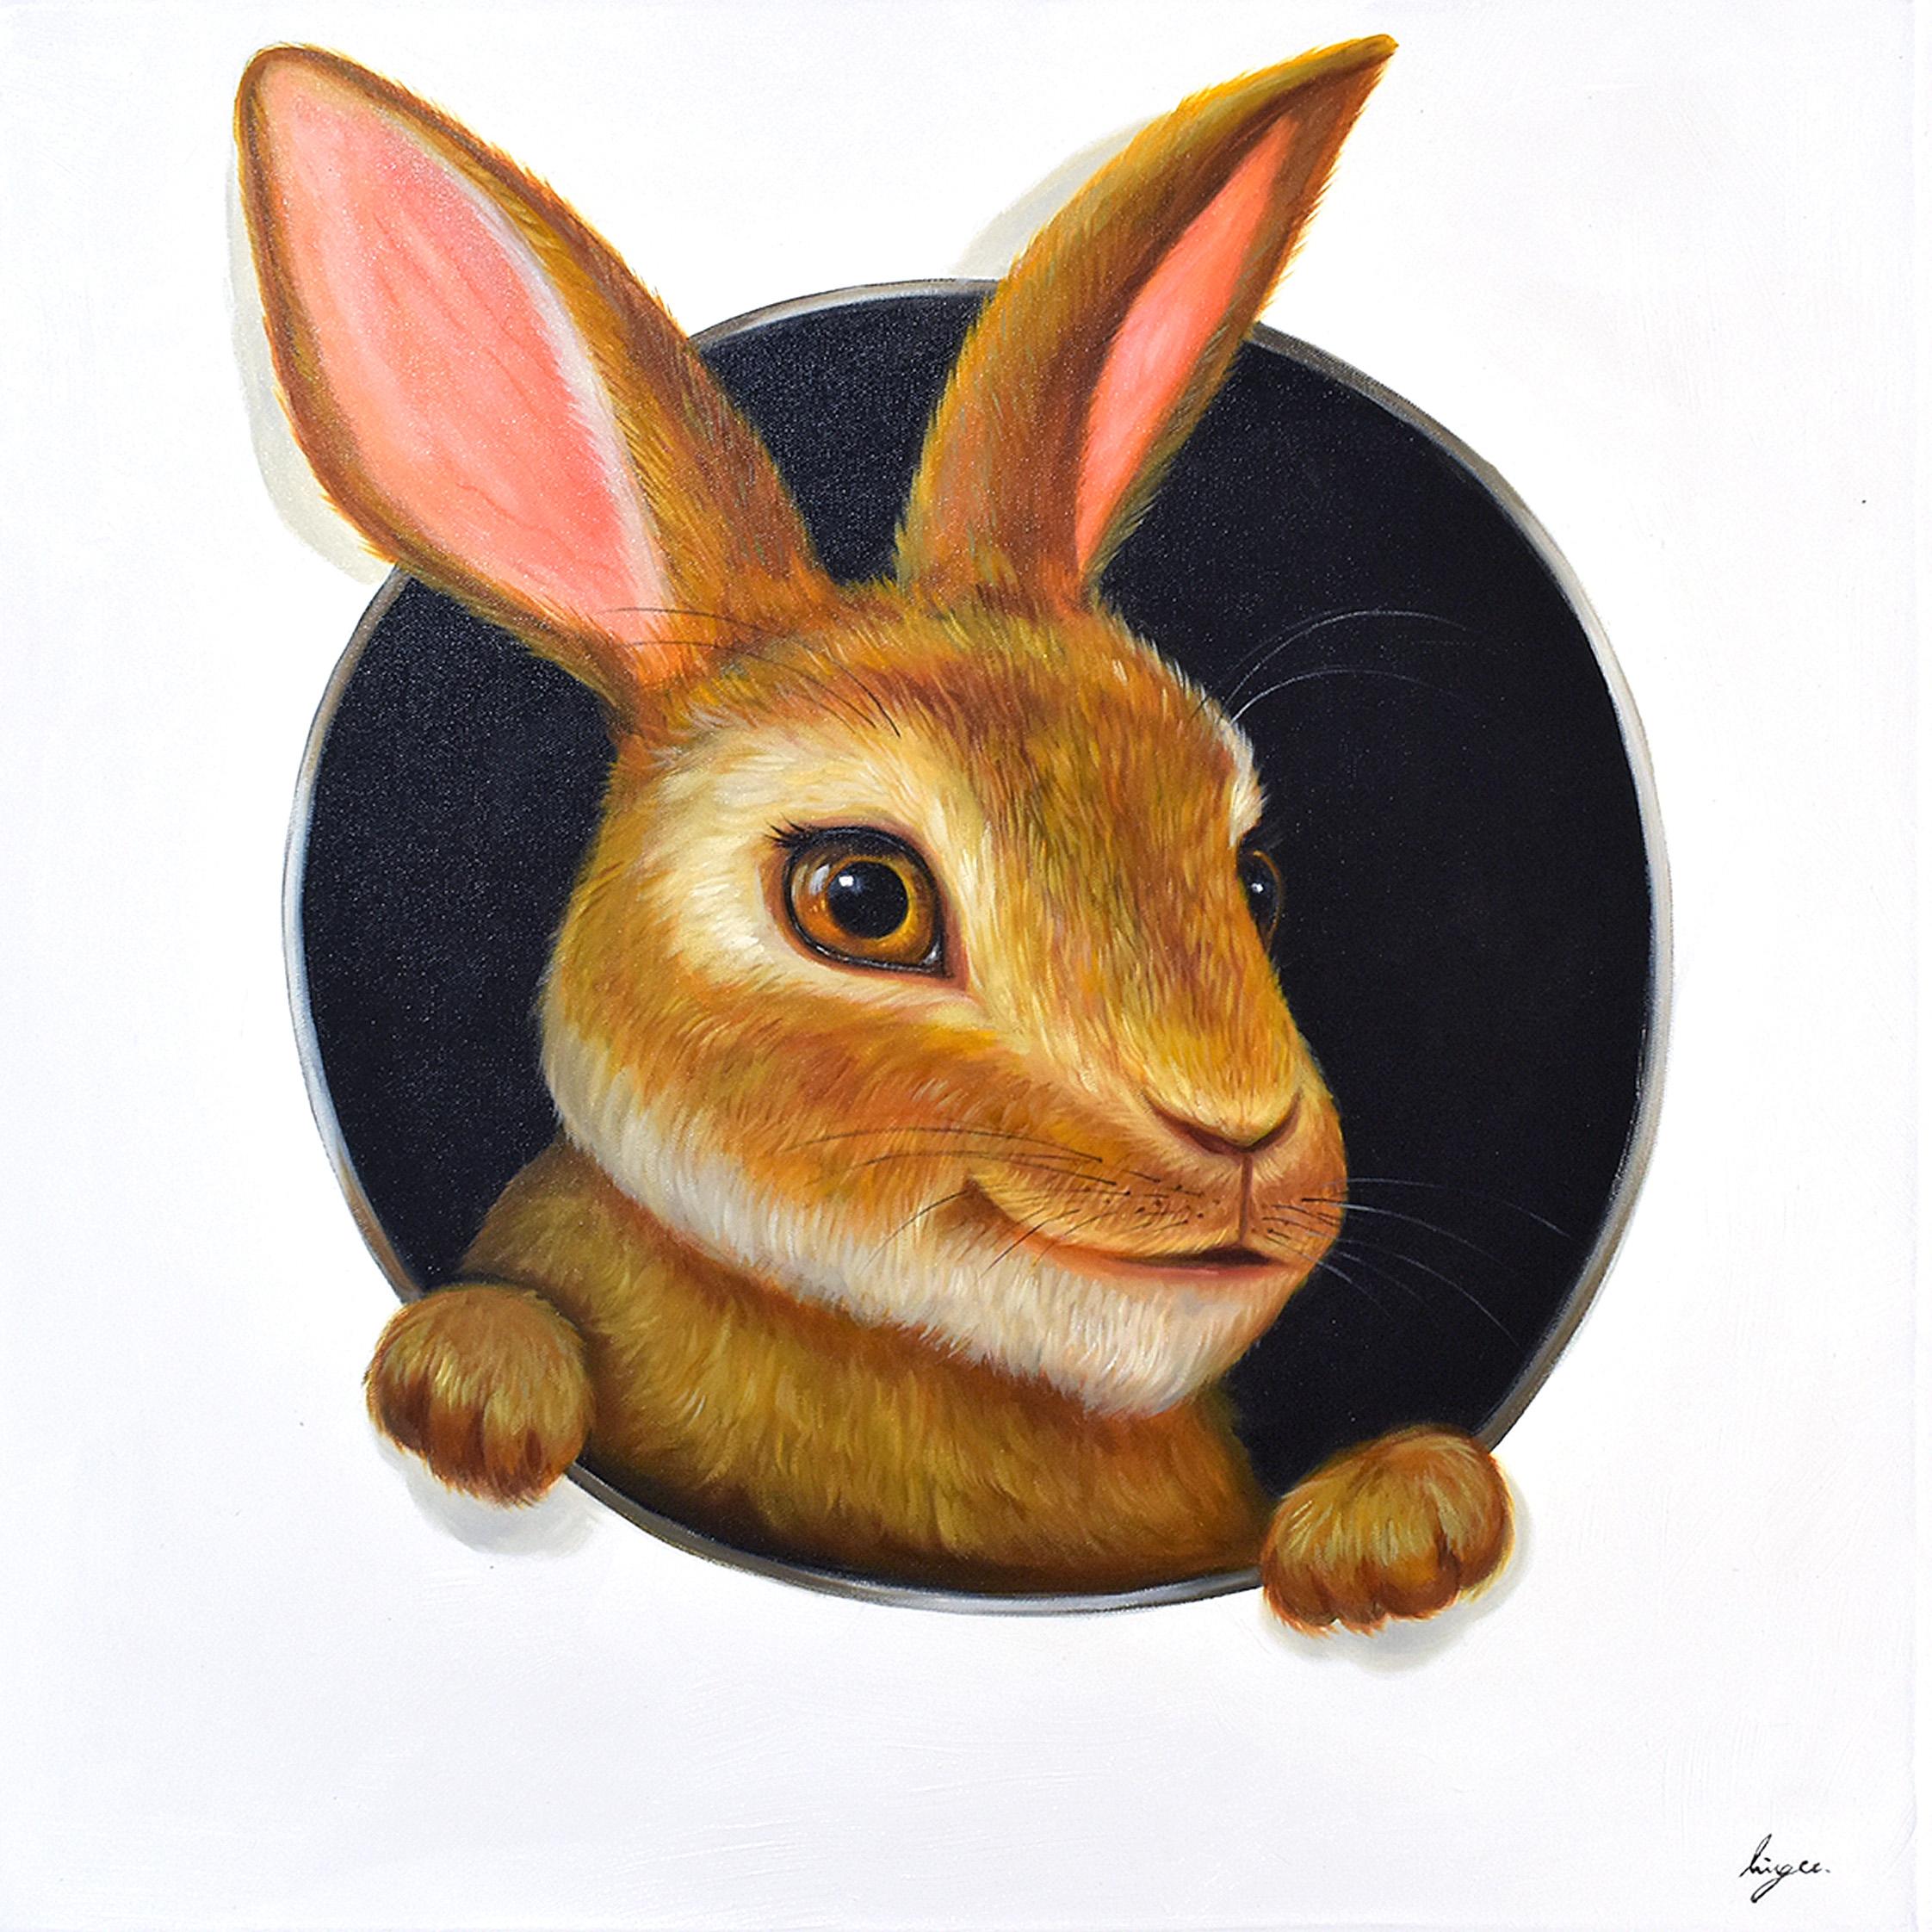 Lingee Bangkhuntod Animal Painting - Hare In Hole 5. Rabbit looking Through a Hole. Adorable rabbit Oil painting